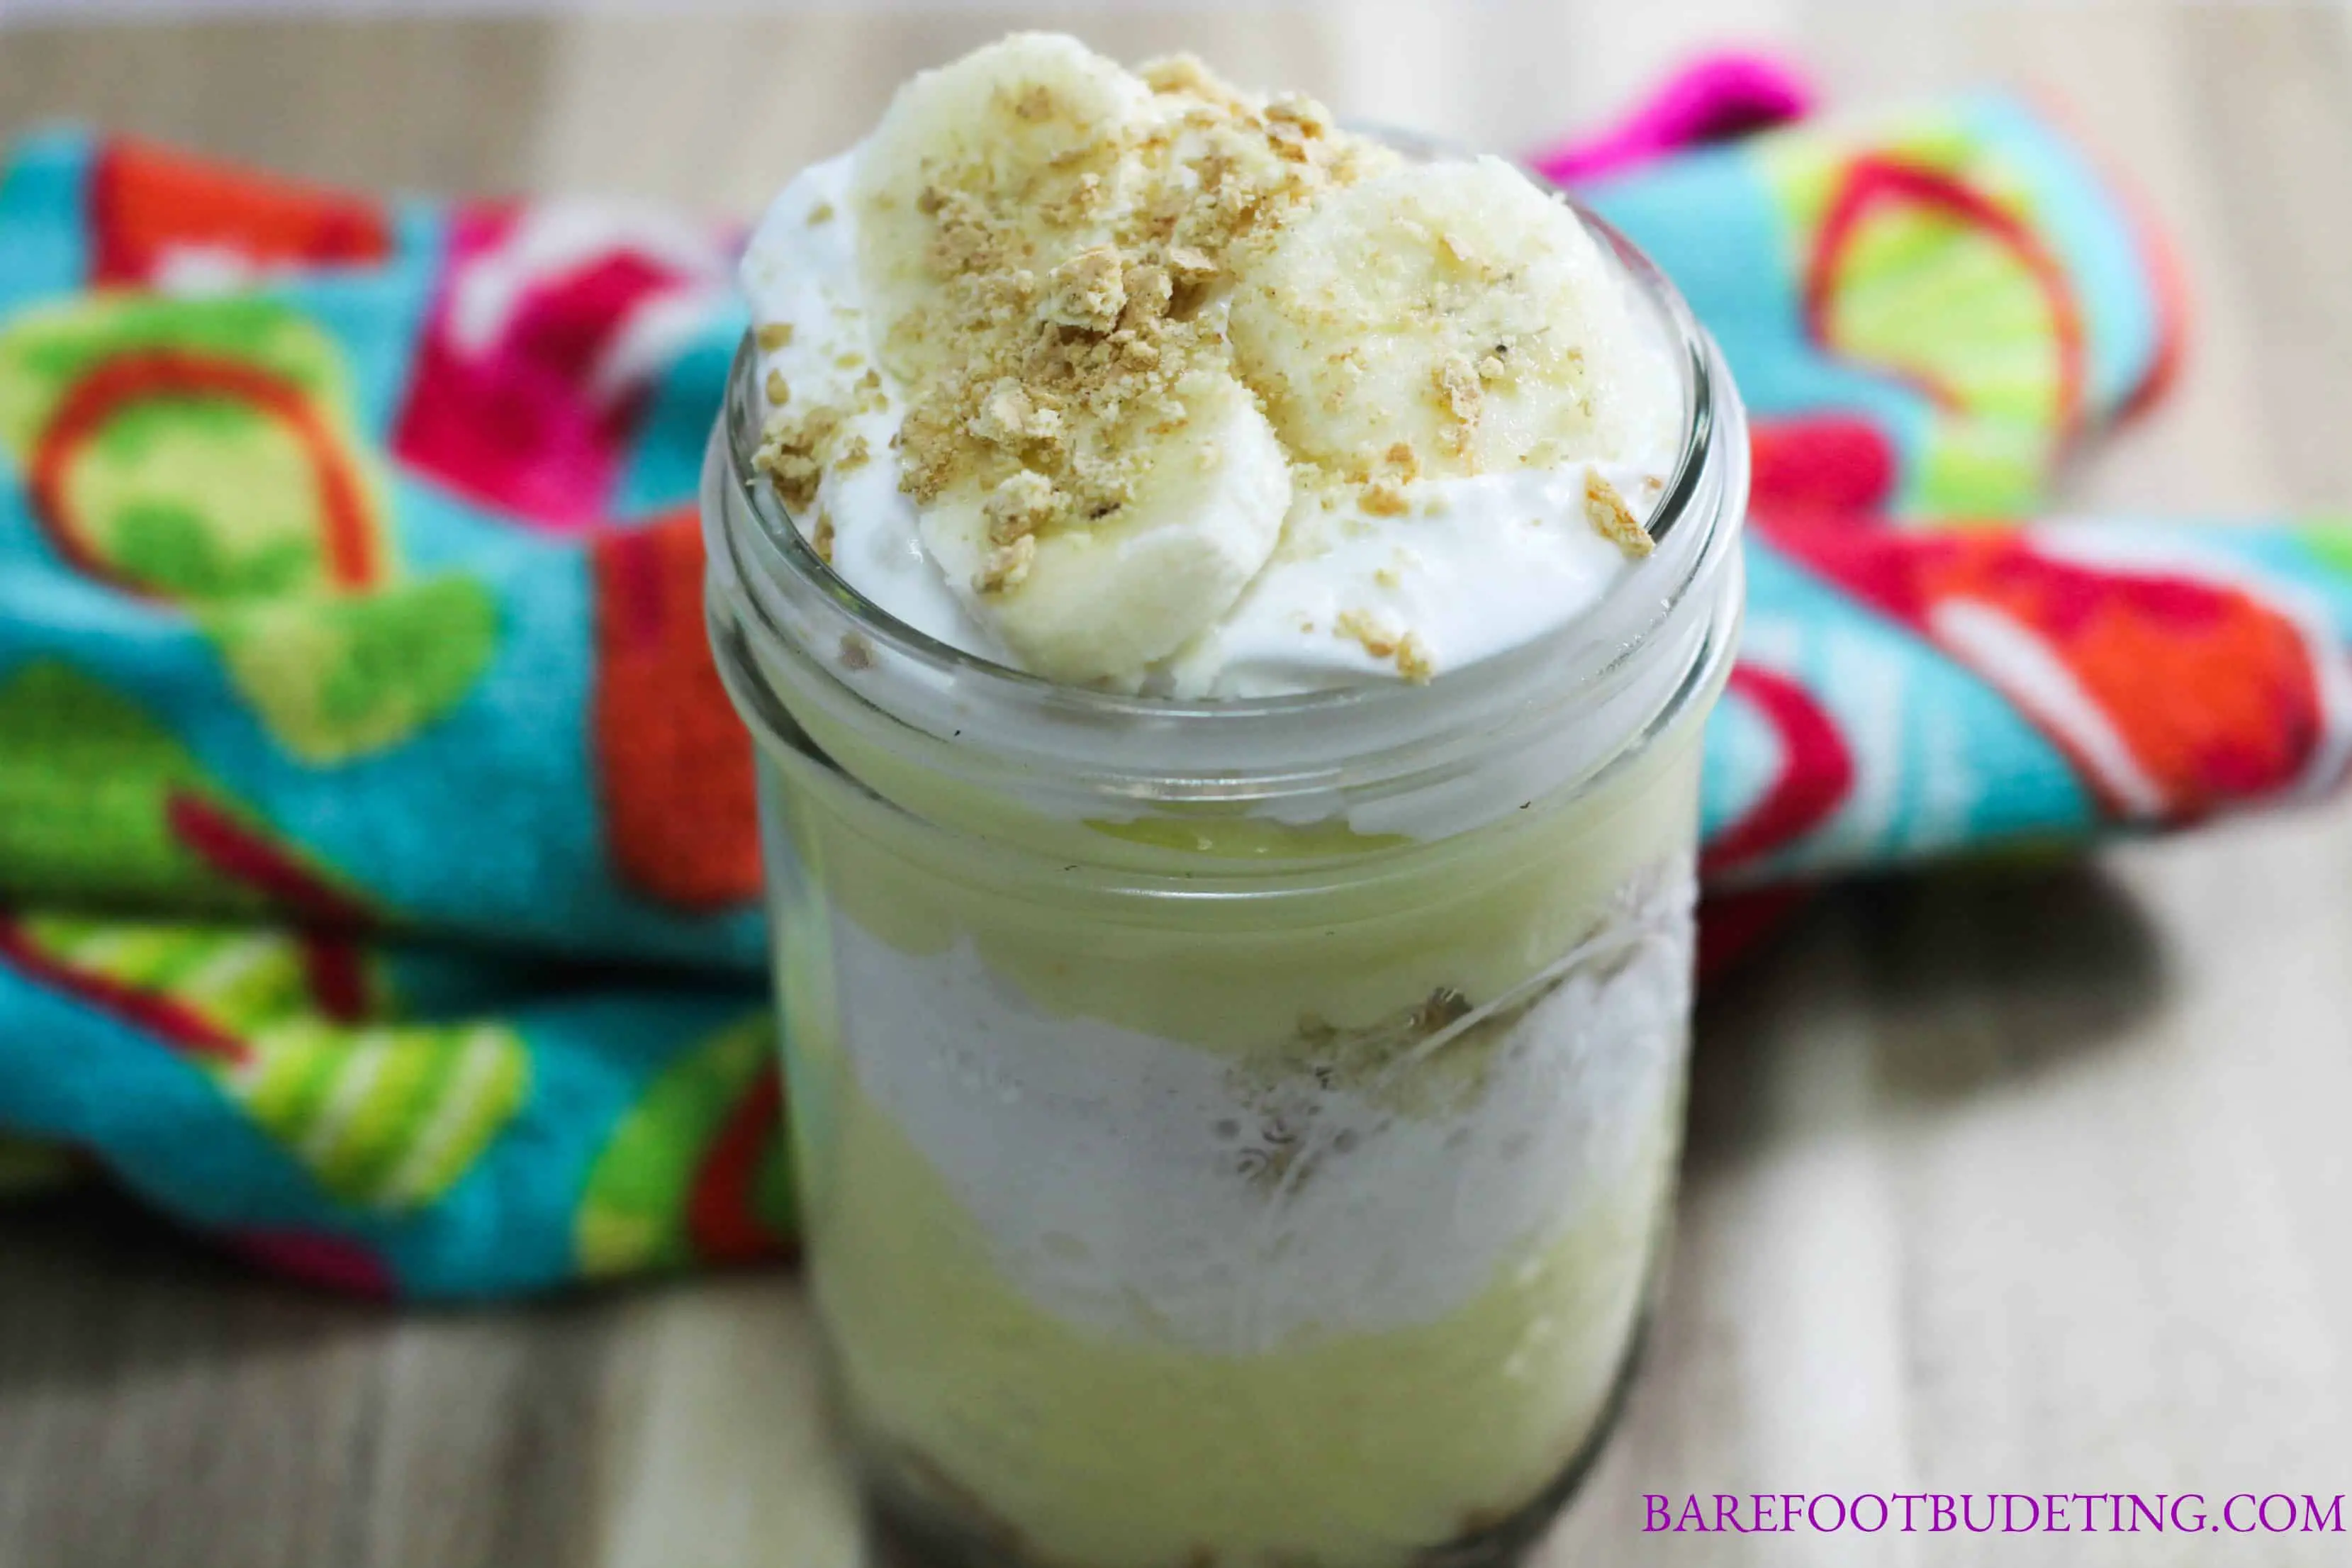 This Mason Jar Banana Cream Trifle recipe is sure to be a favorite dessert recipe for years to come!